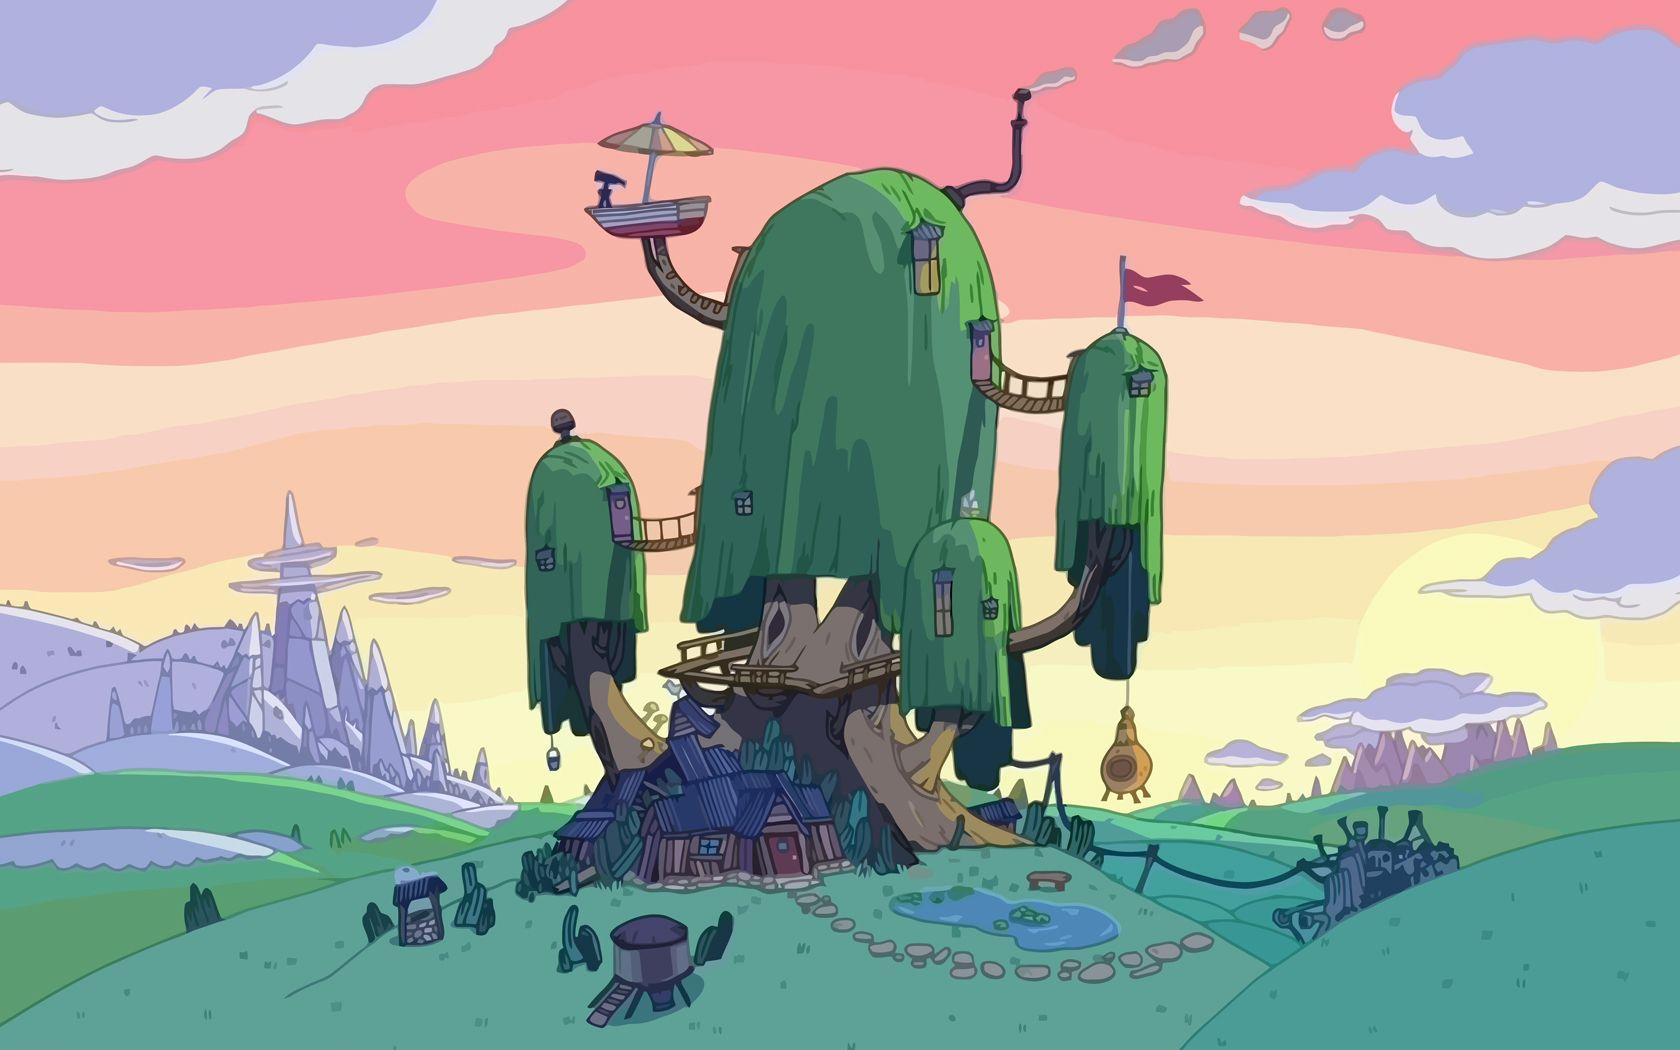 adventure time background scenery 10. Background Check All